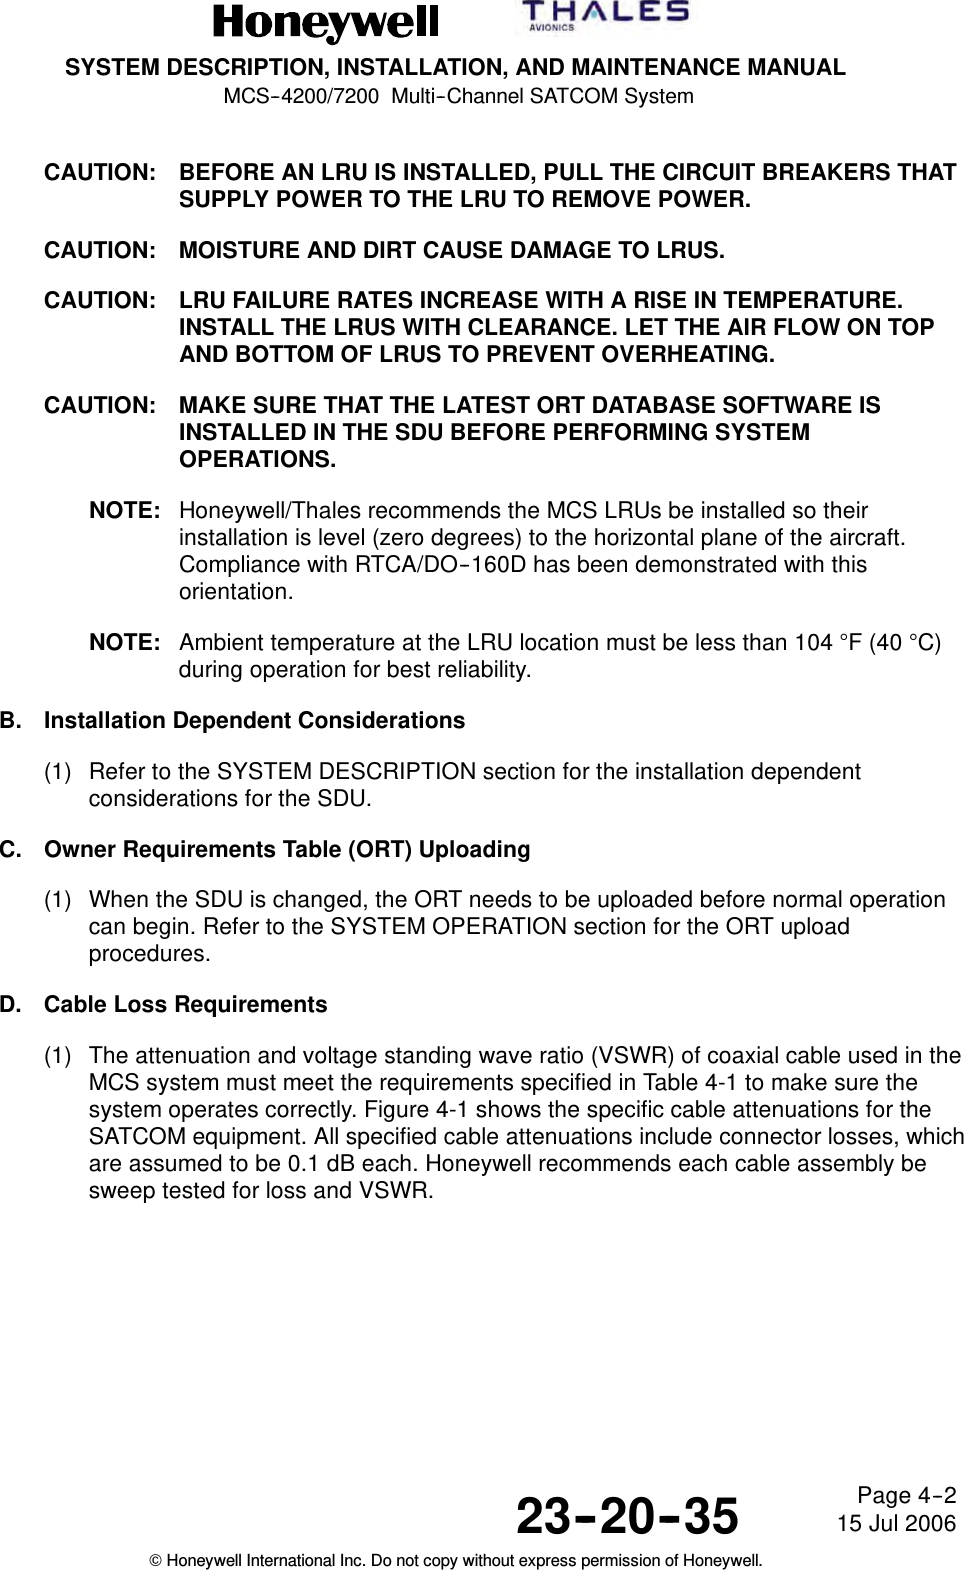 SYSTEM DESCRIPTION, INSTALLATION, AND MAINTENANCE MANUALMCS--4200/7200 Multi--Channel SATCOM System23--20--35 15 Jul 2006Honeywell International Inc. Do not copy without express permission of Honeywell.Page 4--2CAUTION: BEFORE AN LRU IS INSTALLED, PULL THE CIRCUIT BREAKERS THATSUPPLY POWER TO THE LRU TO REMOVE POWER.CAUTION: MOISTURE AND DIRT CAUSE DAMAGE TO LRUS.CAUTION: LRU FAILURE RATES INCREASE WITH A RISE IN TEMPERATURE.INSTALL THE LRUS WITH CLEARANCE. LET THE AIR FLOW ON TOPAND BOTTOM OF LRUS TO PREVENT OVERHEATING.CAUTION: MAKE SURE THAT THE LATEST ORT DATABASE SOFTWARE ISINSTALLED IN THE SDU BEFORE PERFORMING SYSTEMOPERATIONS.NOTE: Honeywell/Thales recommends the MCS LRUs be installed so theirinstallation is level (zero degrees) to the horizontal plane of the aircraft.Compliance with RTCA/DO--160D has been demonstrated with thisorientation.NOTE: Ambient temperature at the LRU location must be less than 104 °F(40°C)during operation for best reliability.B. Installation Dependent Considerations(1) Refer to the SYSTEM DESCRIPTION section for the installation dependentconsiderations for the SDU.C. Owner Requirements Table (ORT) Uploading(1) When the SDU is changed, the ORT needs to be uploaded before normal operationcan begin. Refer to the SYSTEM OPERATION section for the ORT uploadprocedures.D. Cable Loss Requirements(1) The attenuation and voltage standing wave ratio (VSWR) of coaxial cable used in theMCS system must meet the requirements specified in Table 4-1 to make sure thesystem operates correctly. Figure 4-1 shows the specific cable attenuations for theSATCOM equipment. All specified cable attenuations include connector losses, whichare assumed to be 0.1 dB each. Honeywell recommends each cable assembly besweep tested for loss and VSWR.